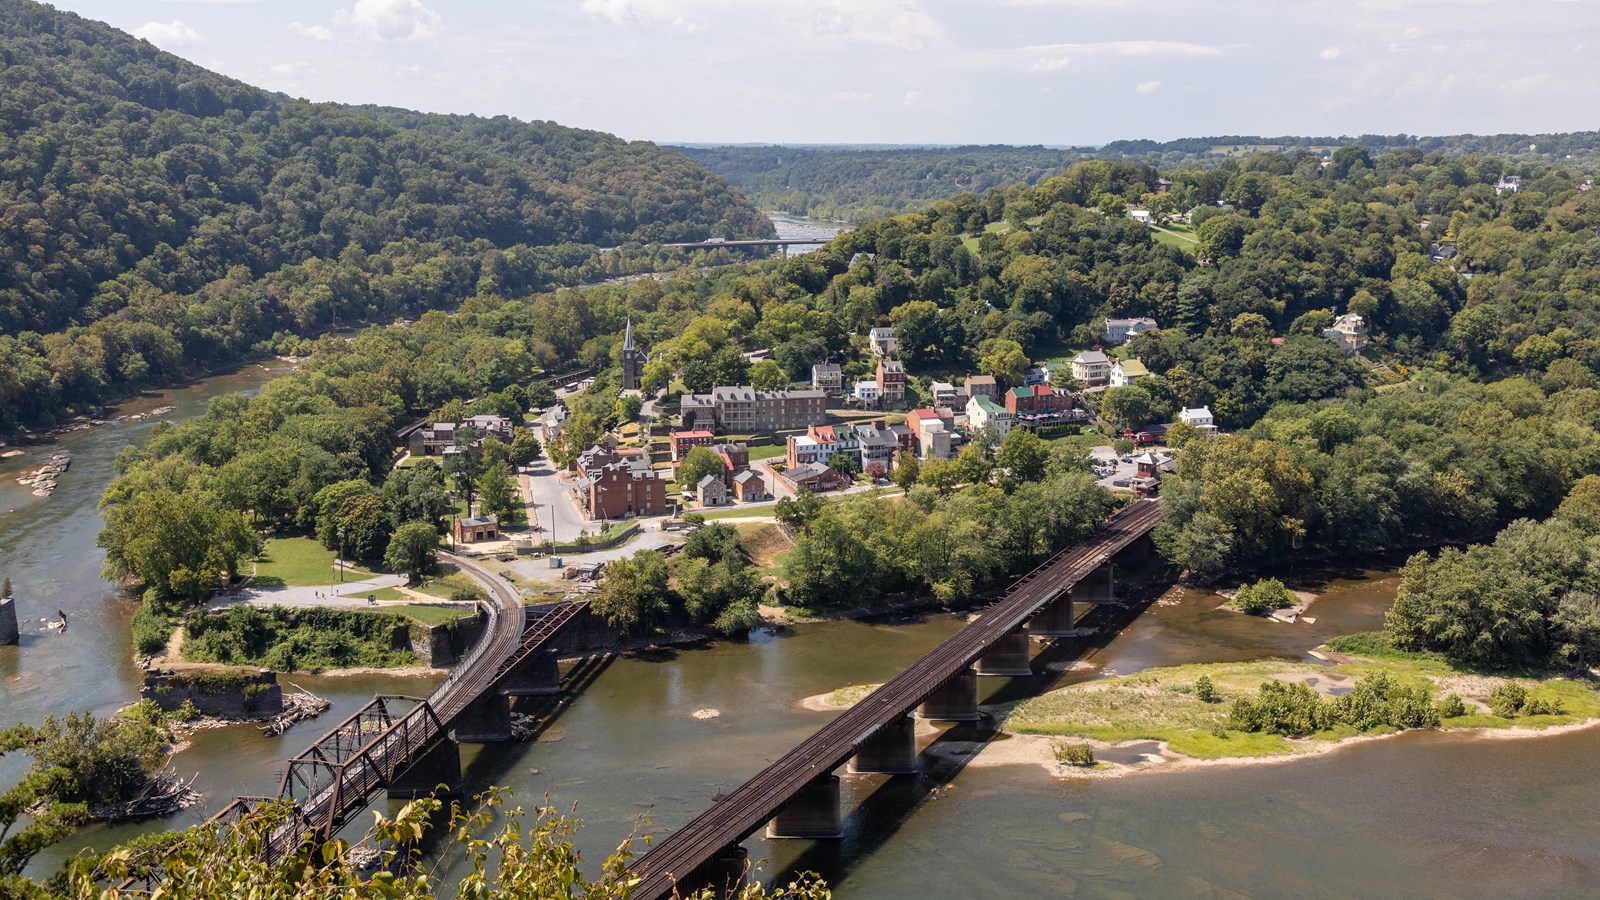 Elevated view of Harpers Ferry, two rivers, and two railroad bridges.